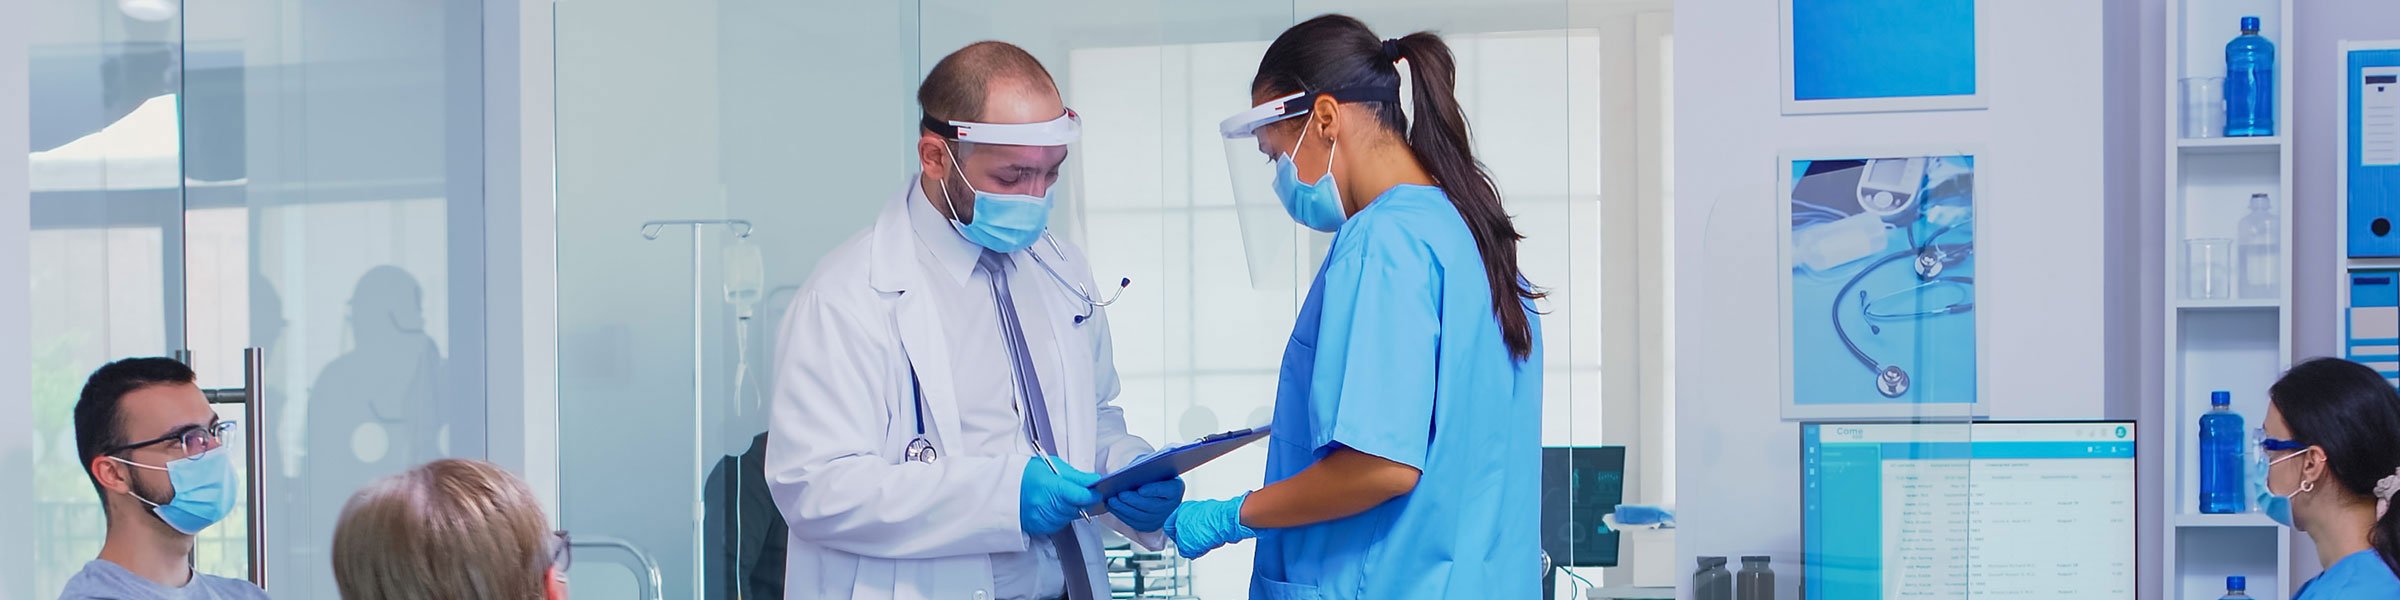 nurse and doctor consulting with masks on